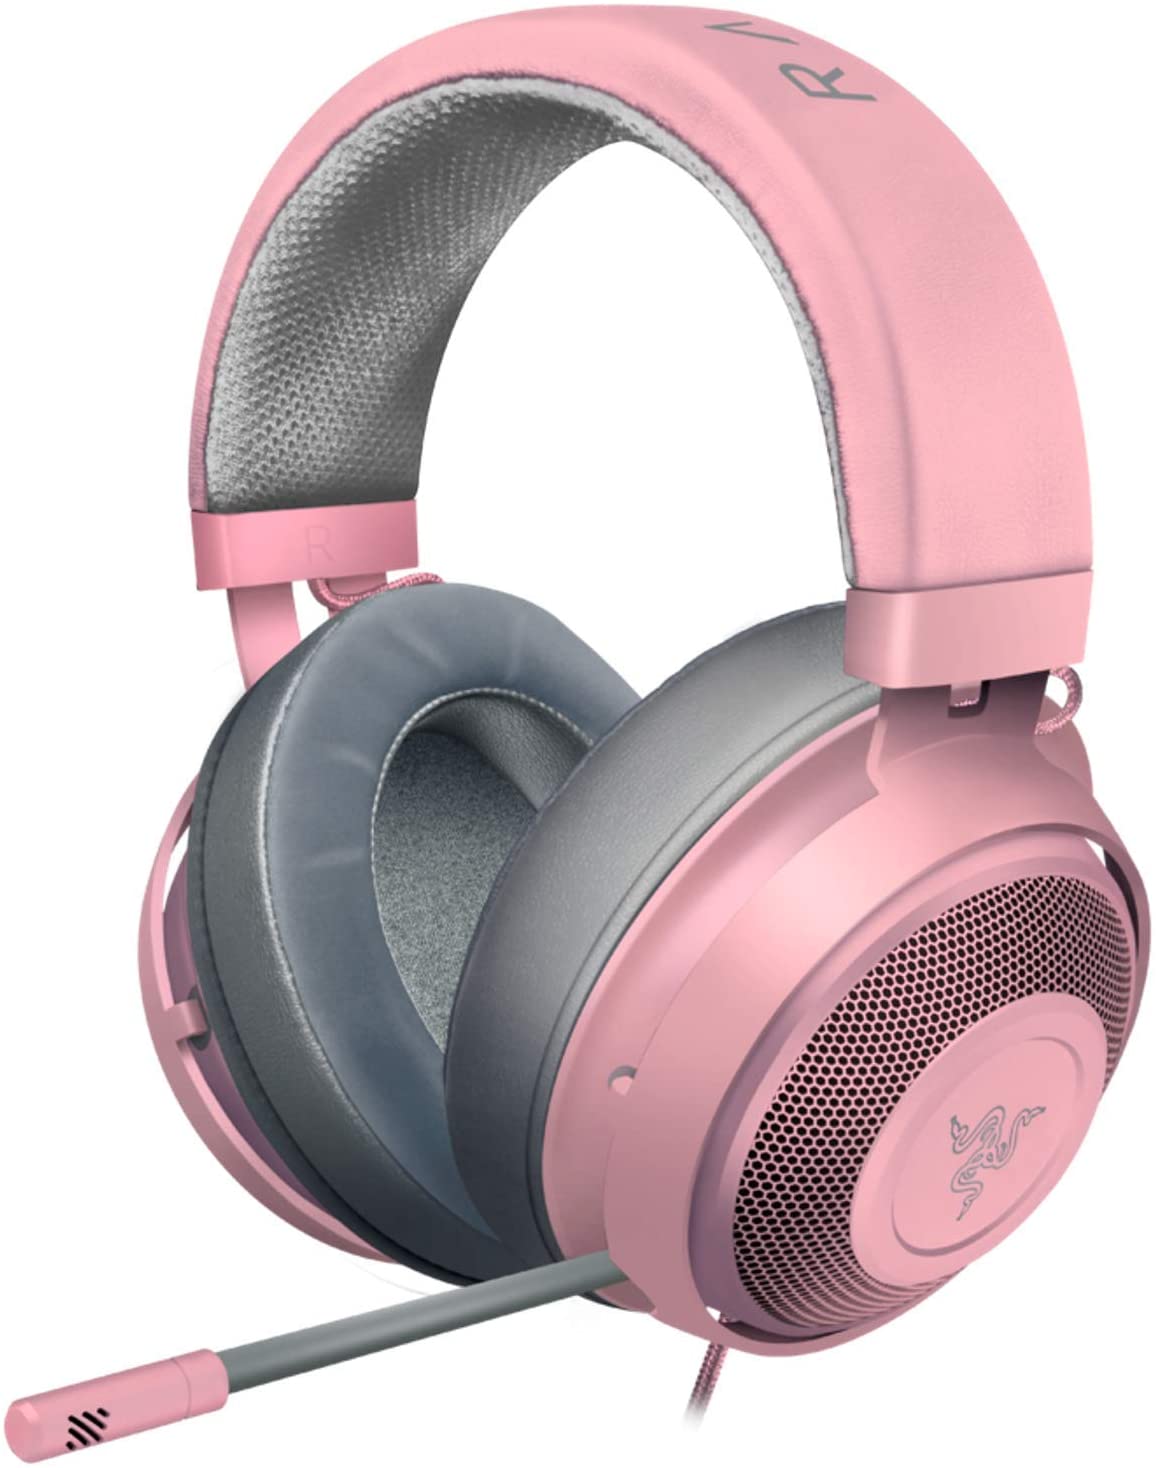 The 7 best pink gaming headsets in 2020 | Dot Esports